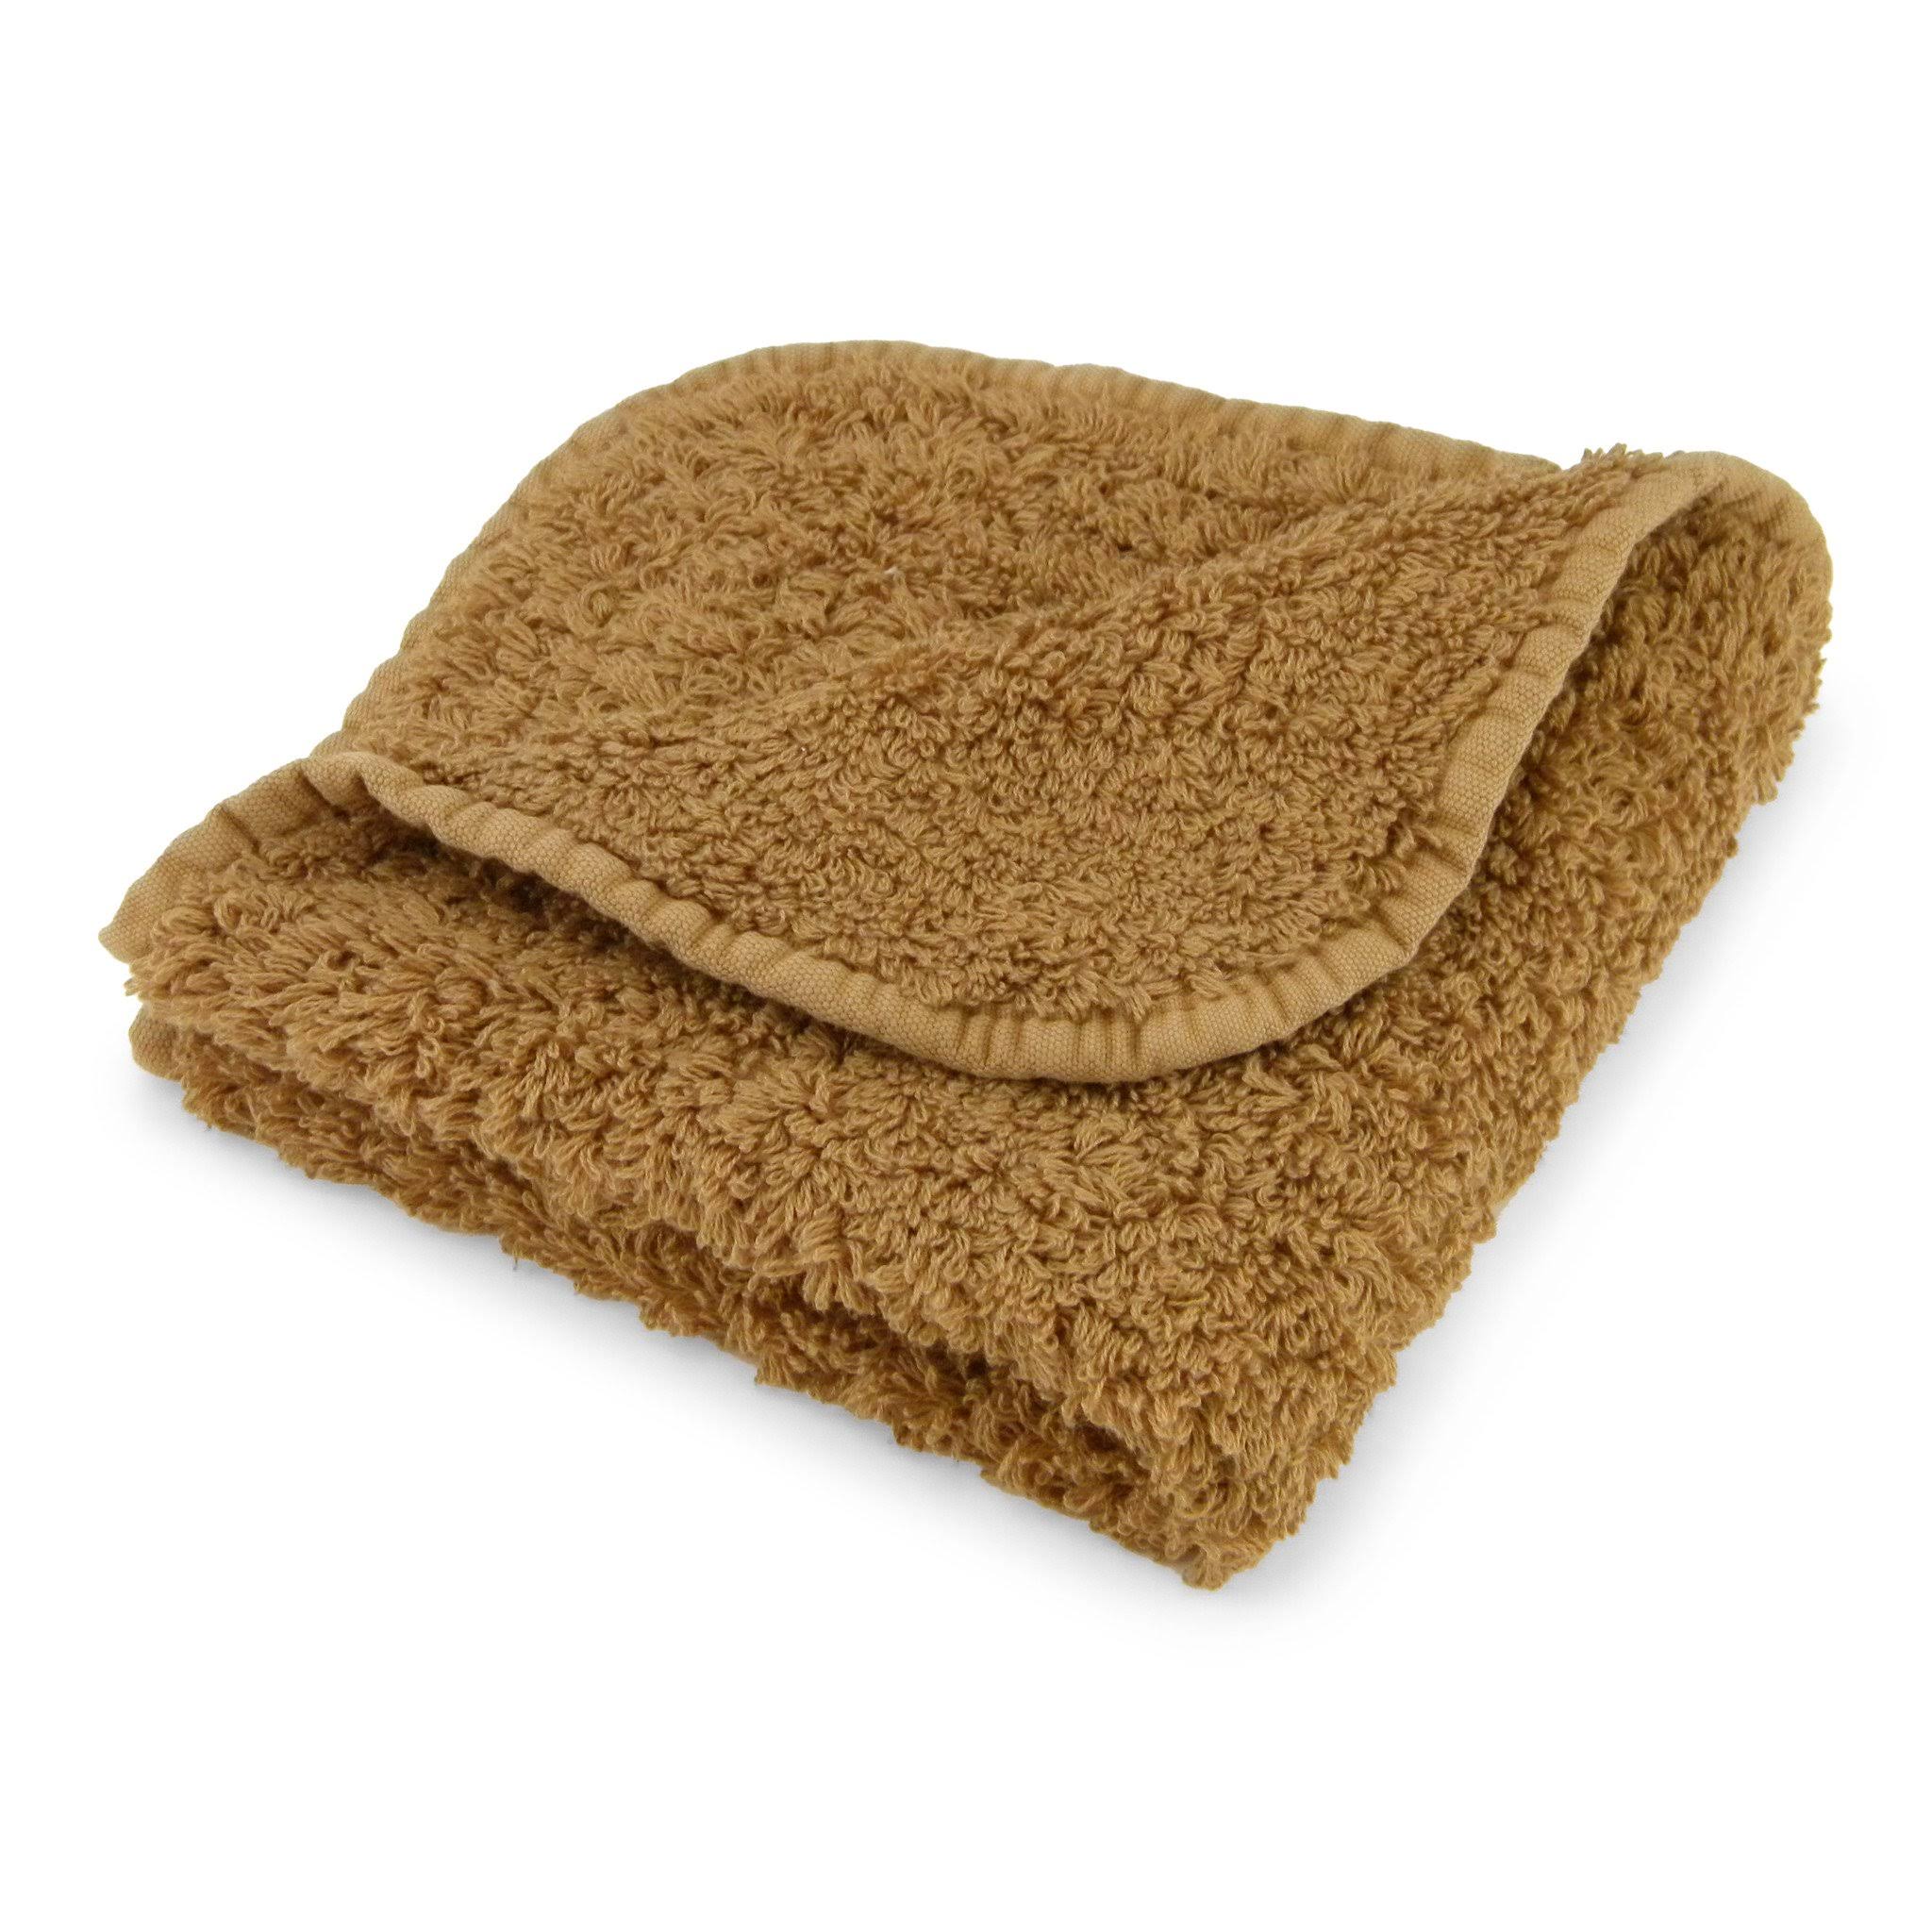 Abyss Super Pile Towels - Hand Towel 17x30" Gold 840